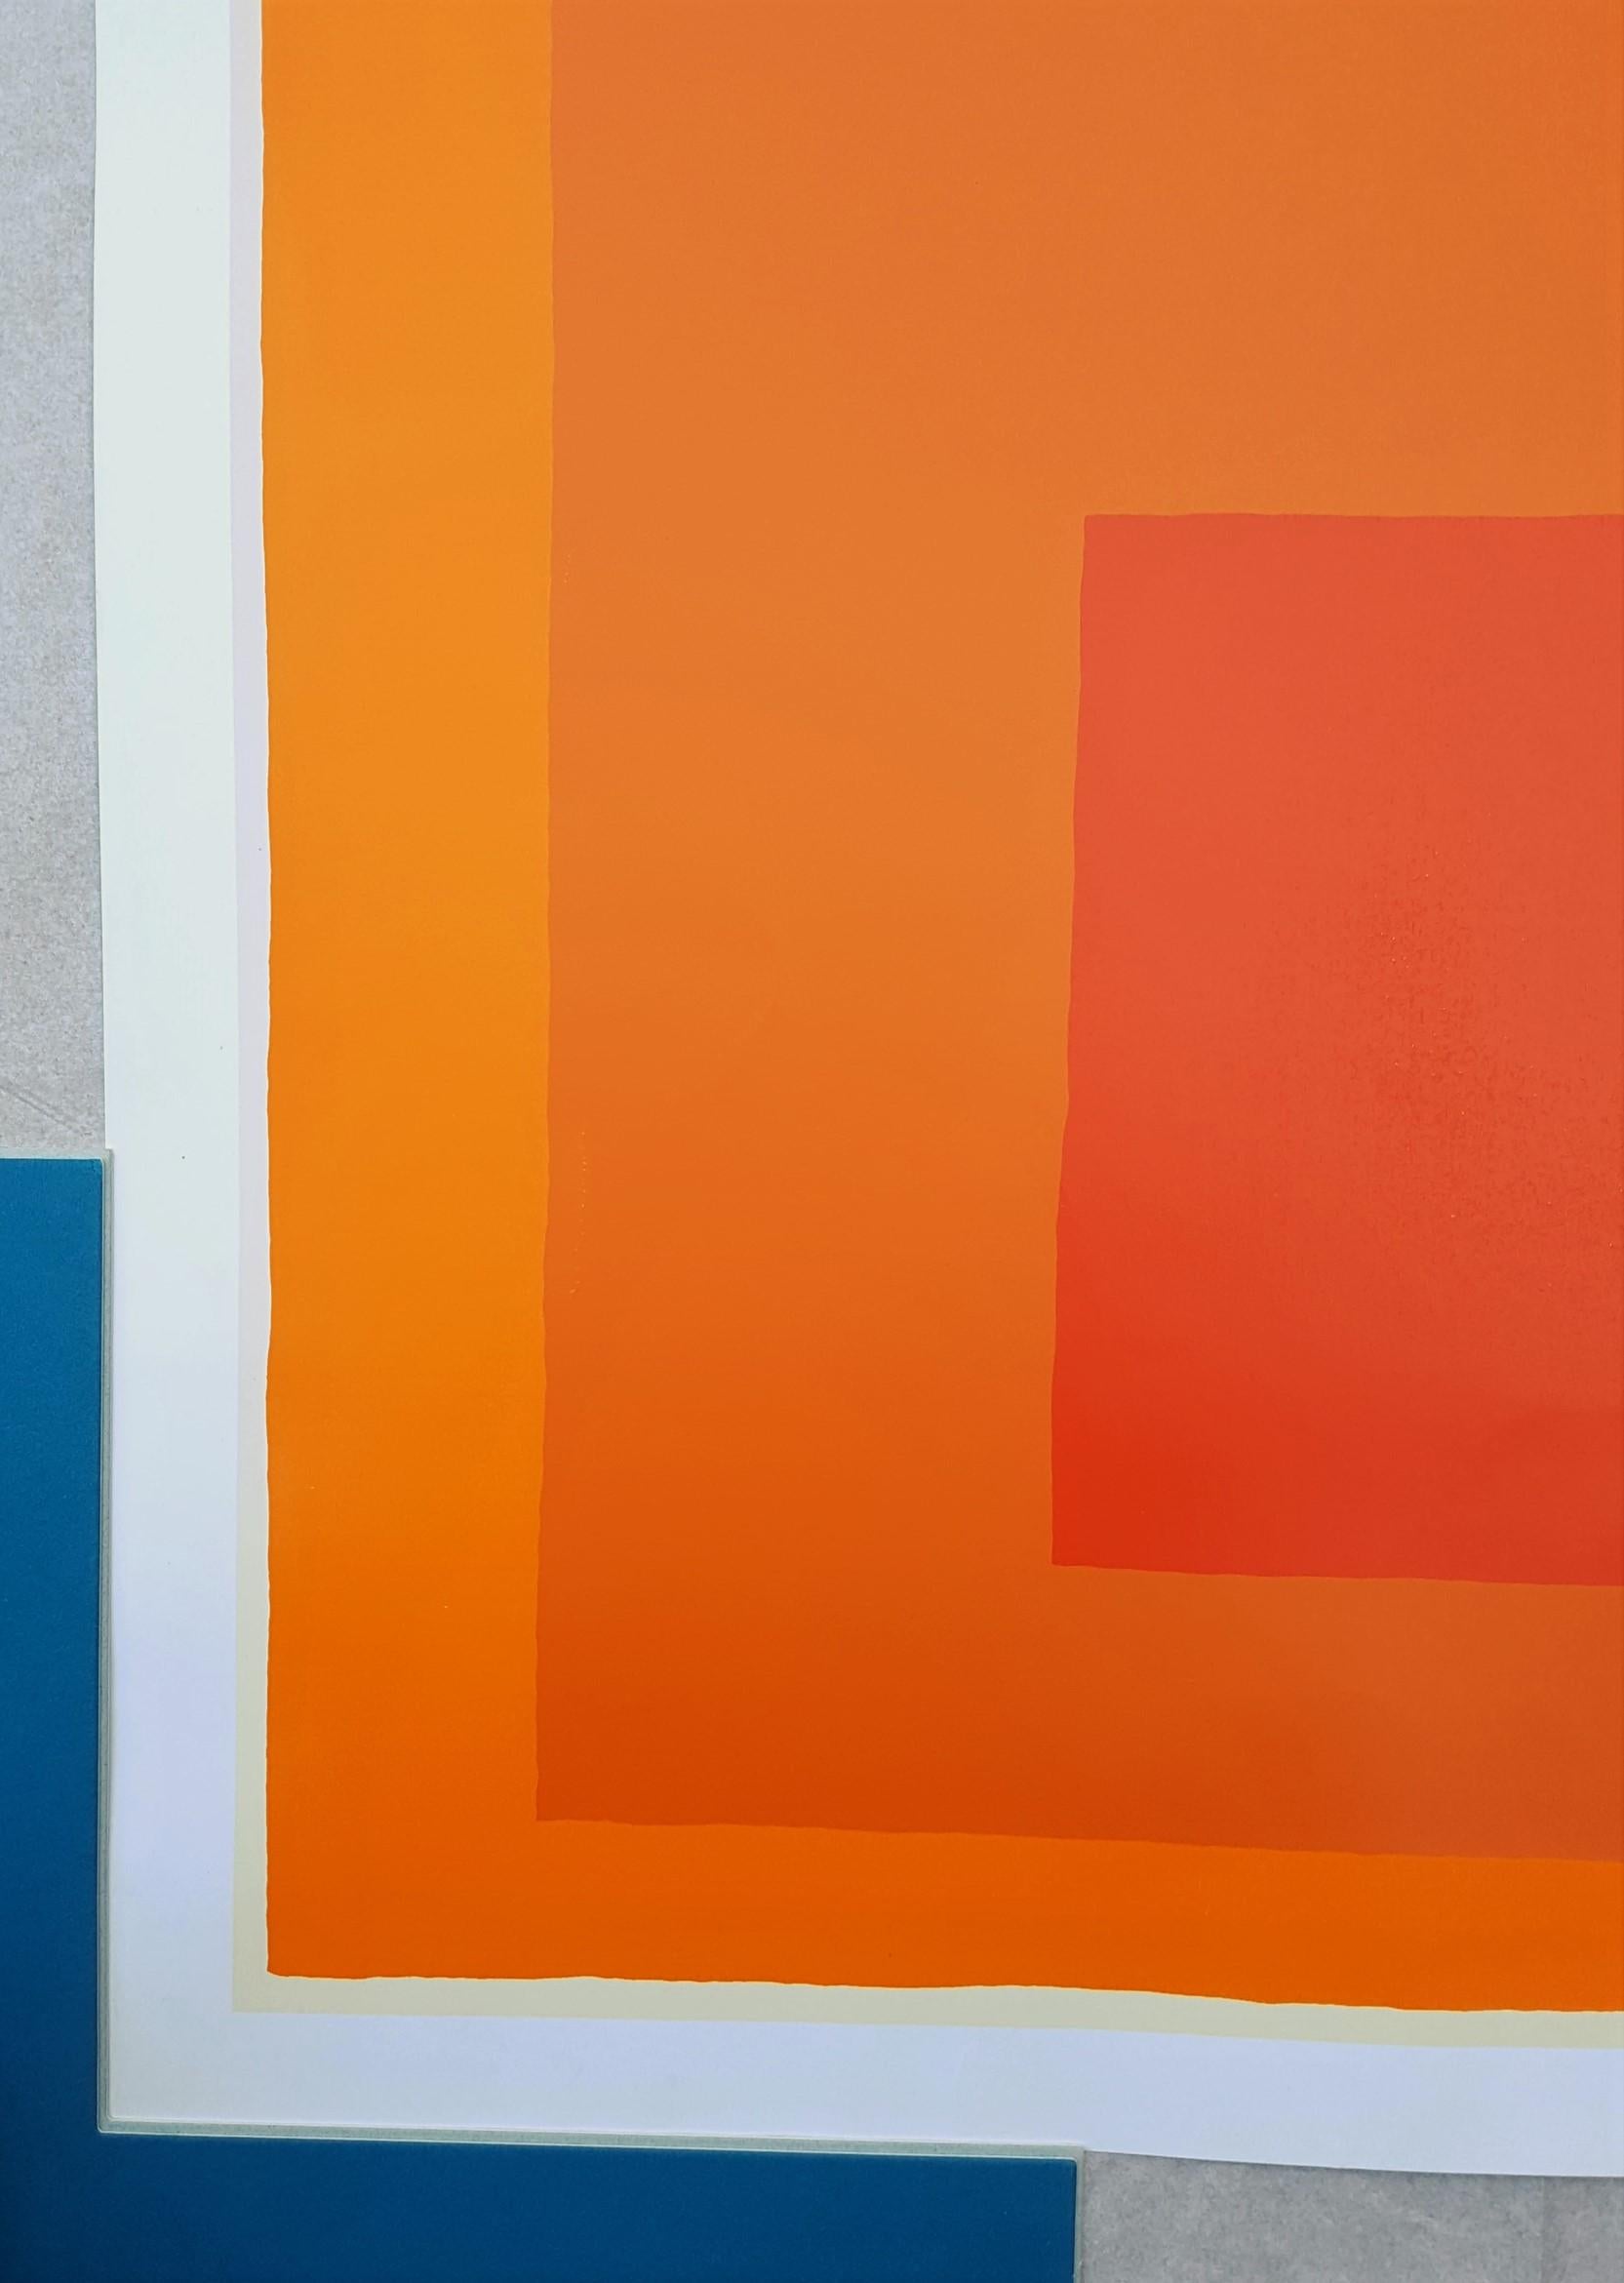 Galerie Melki (Homage to the Square) - Abstract Geometric Print by Josef Albers